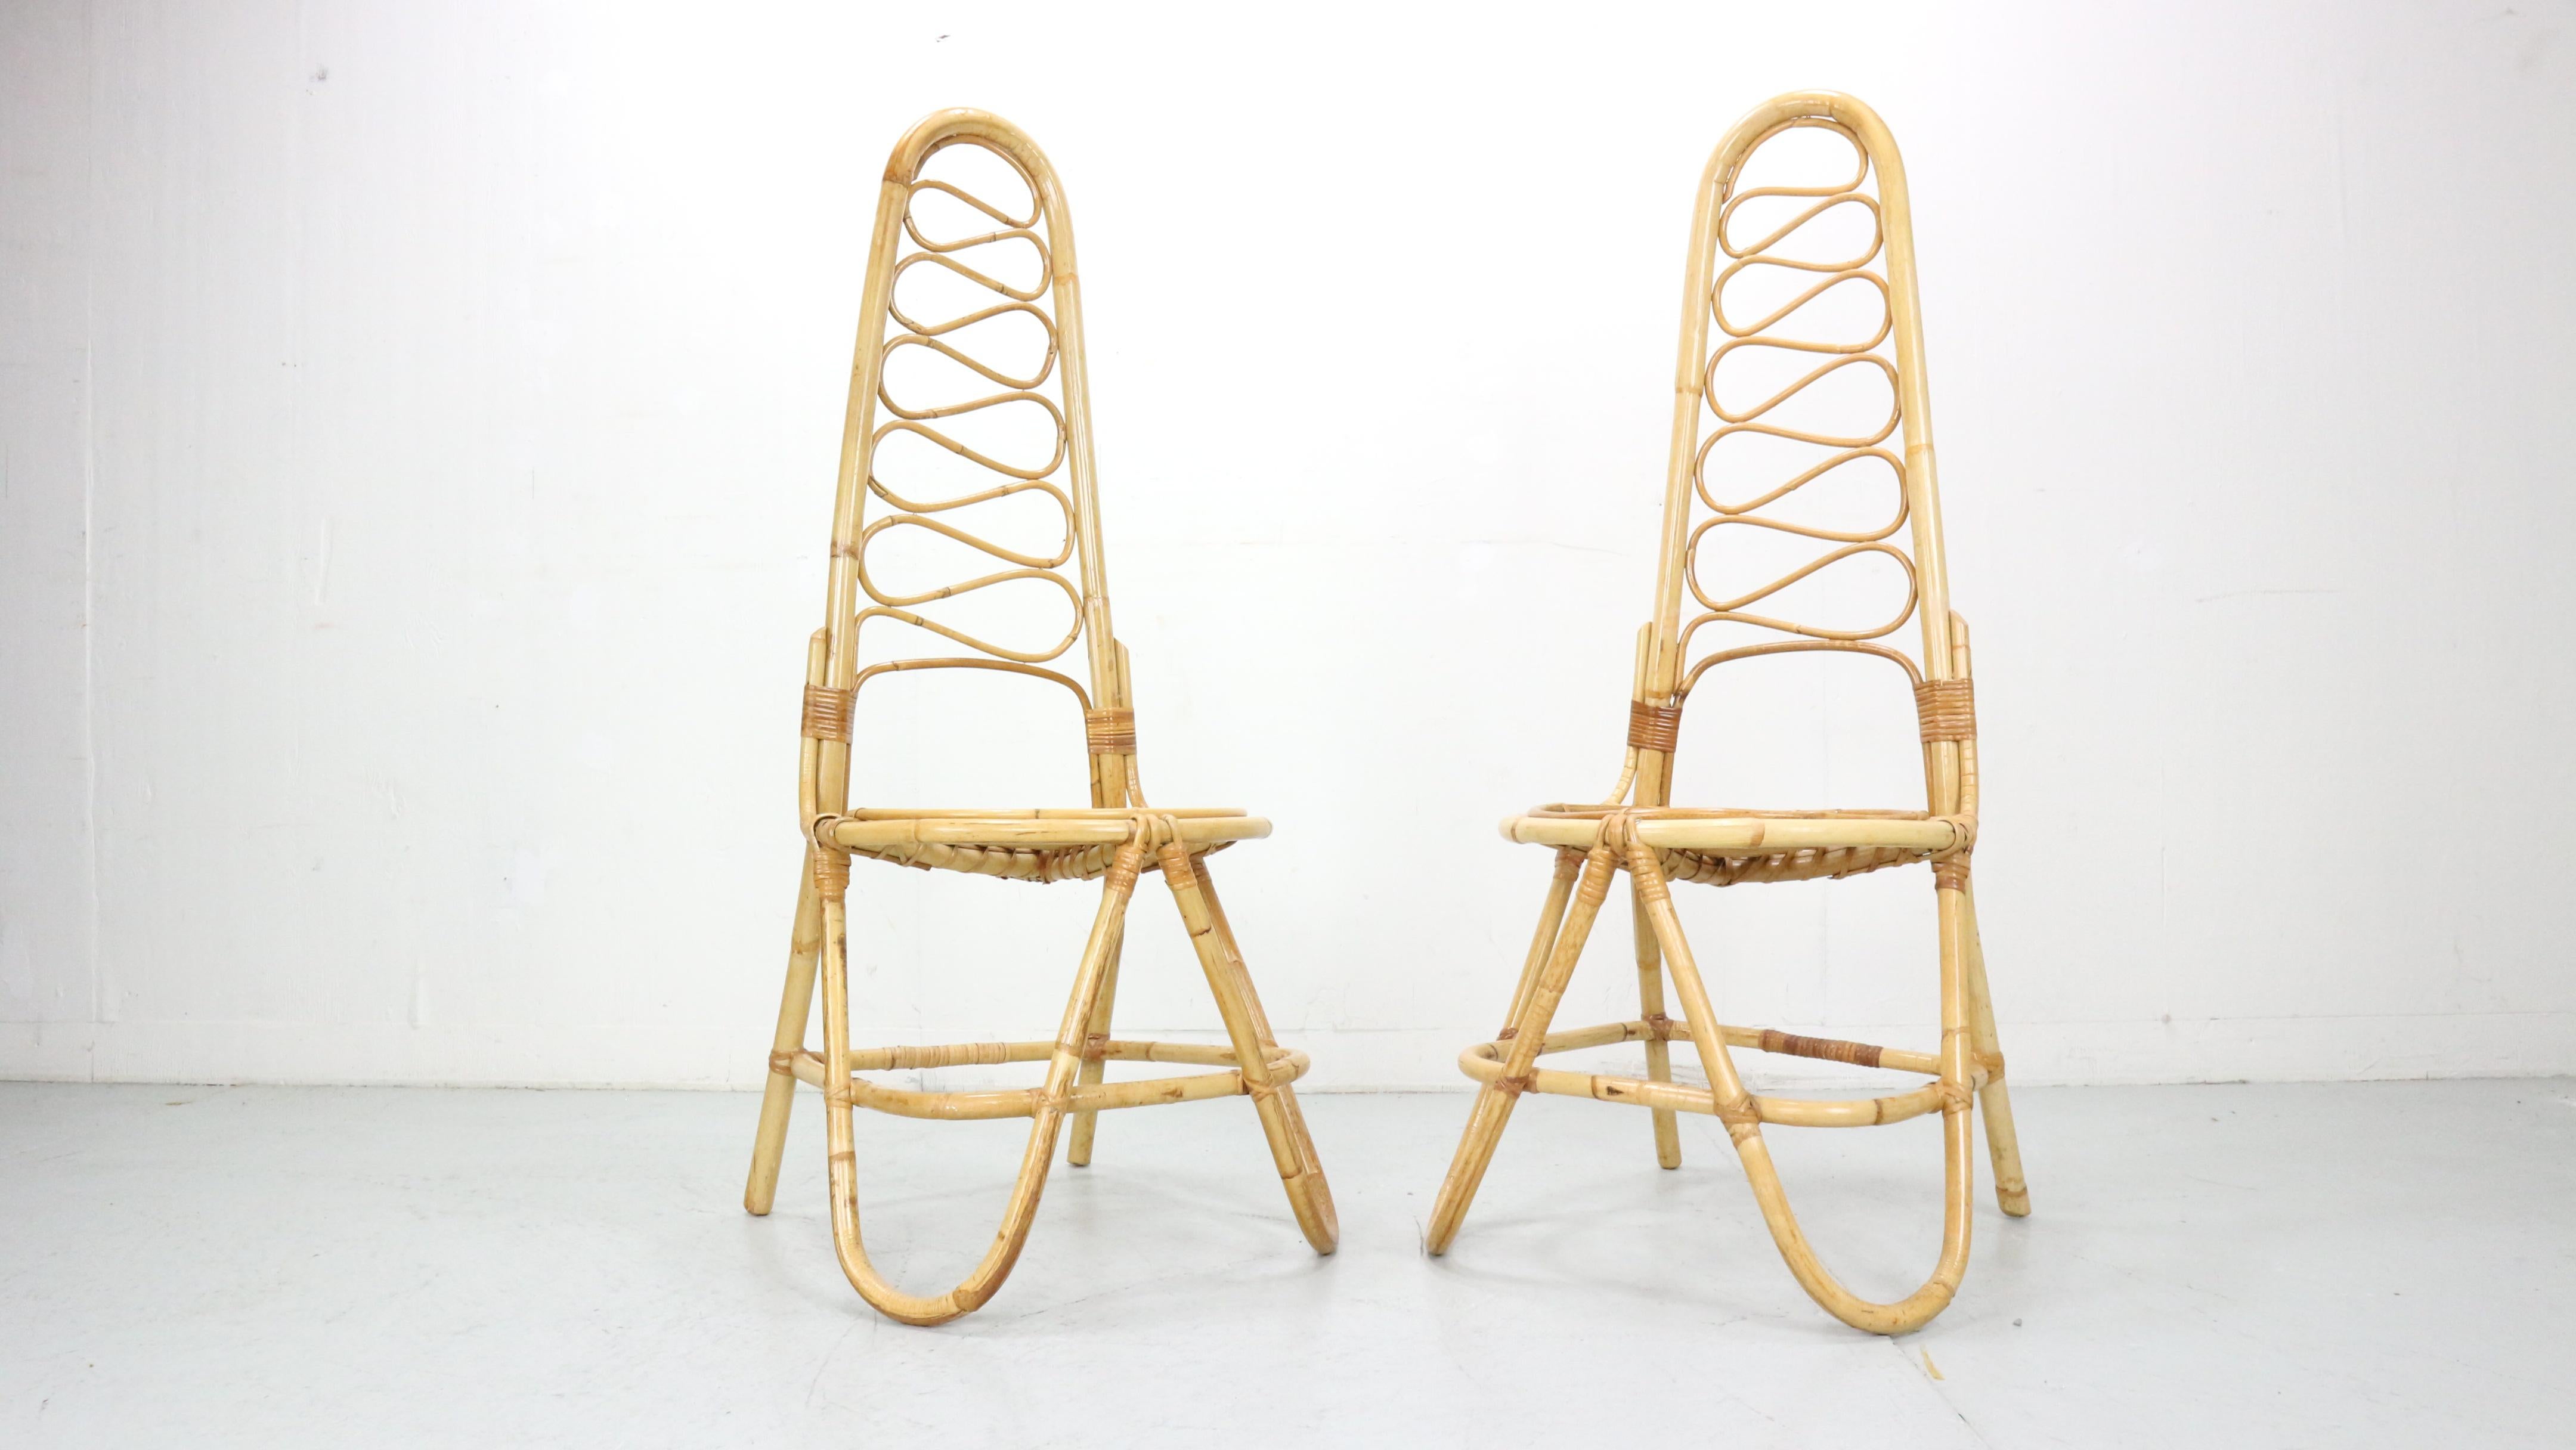 Beautiful and elegant mid-century modern high back chair. Designed by Dirk van Sliedrecht for Rohe Noordwolde. Classic Dutch design from the 1960s. Frame and seat made of bent bamboo and rattan. This beautiful Mid-Century Modern high back chair by